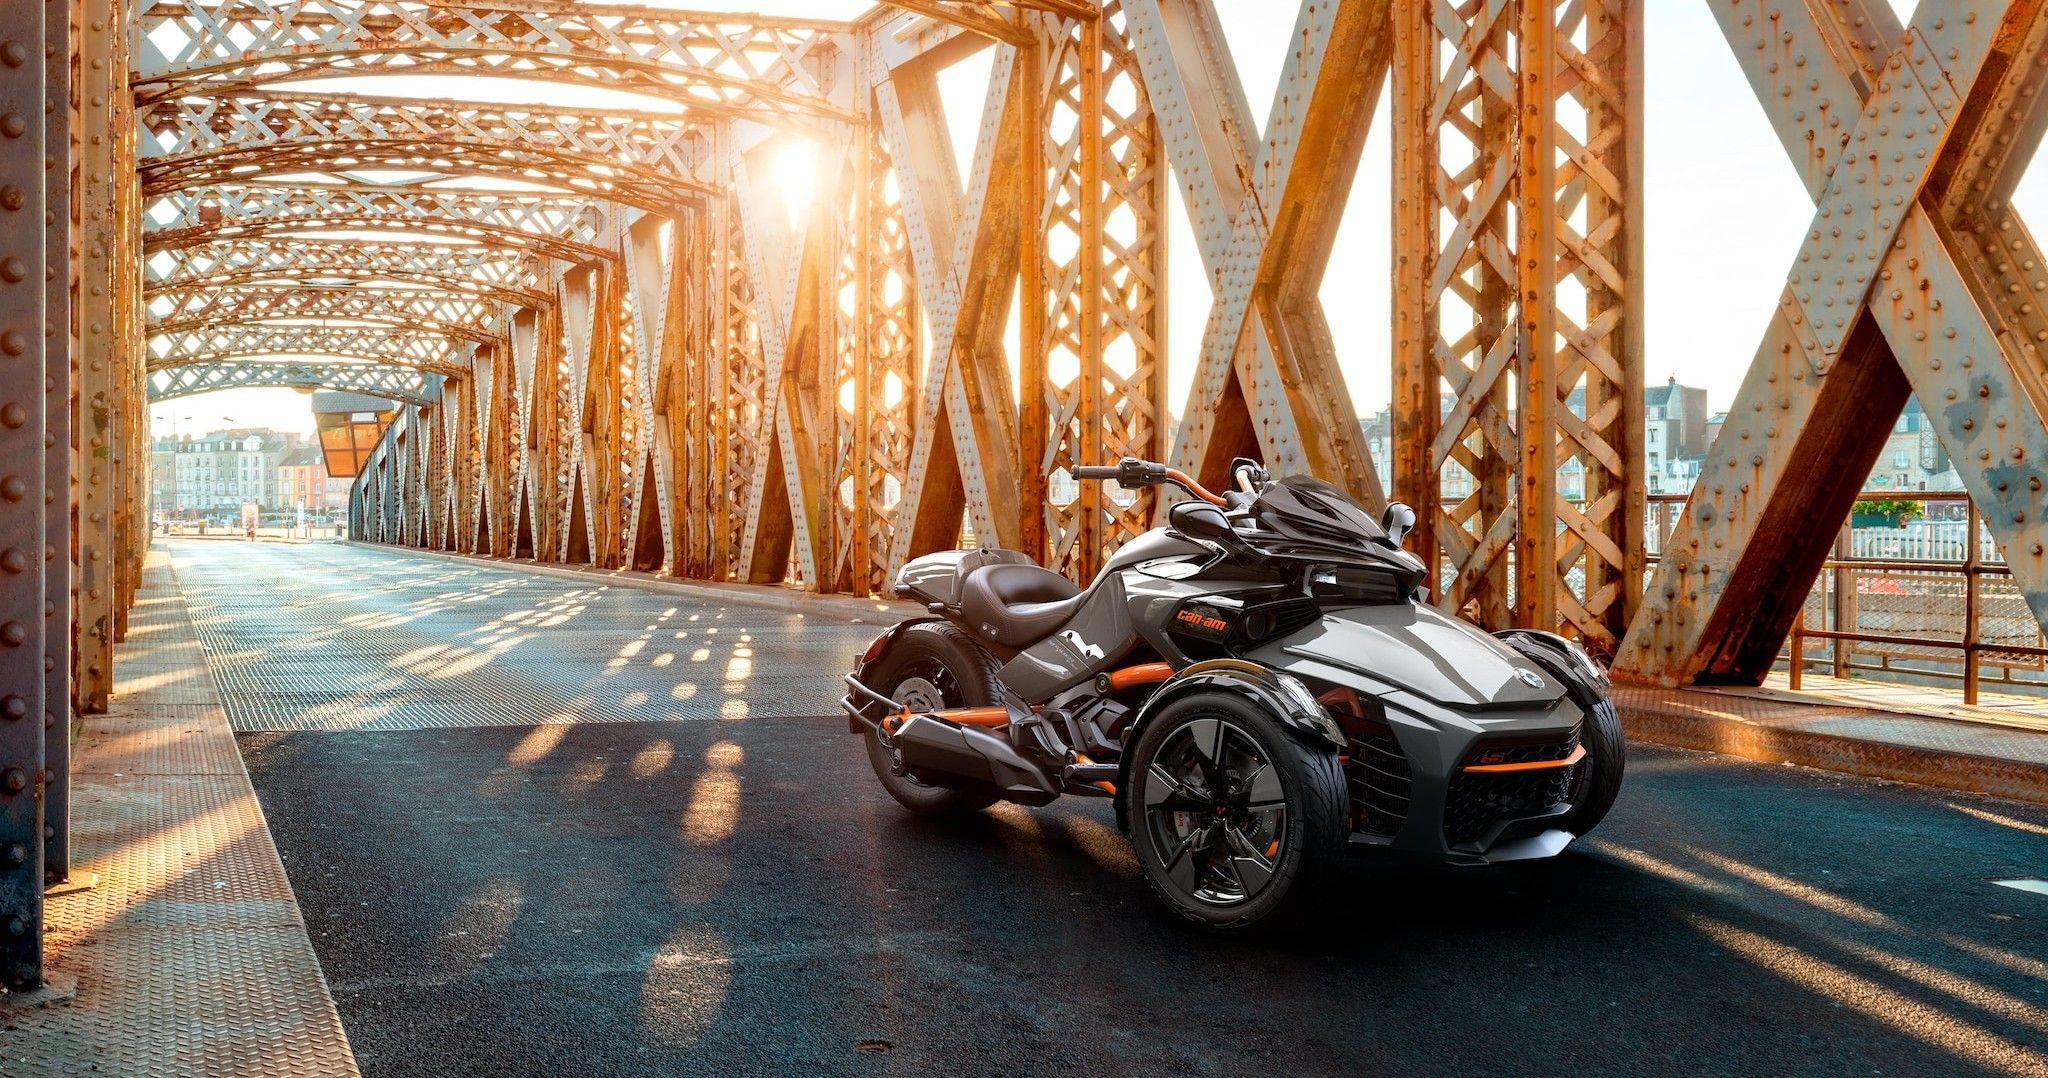 Is the Can-Am Spyder The Ultimate Three-Wheeled Vehicle?